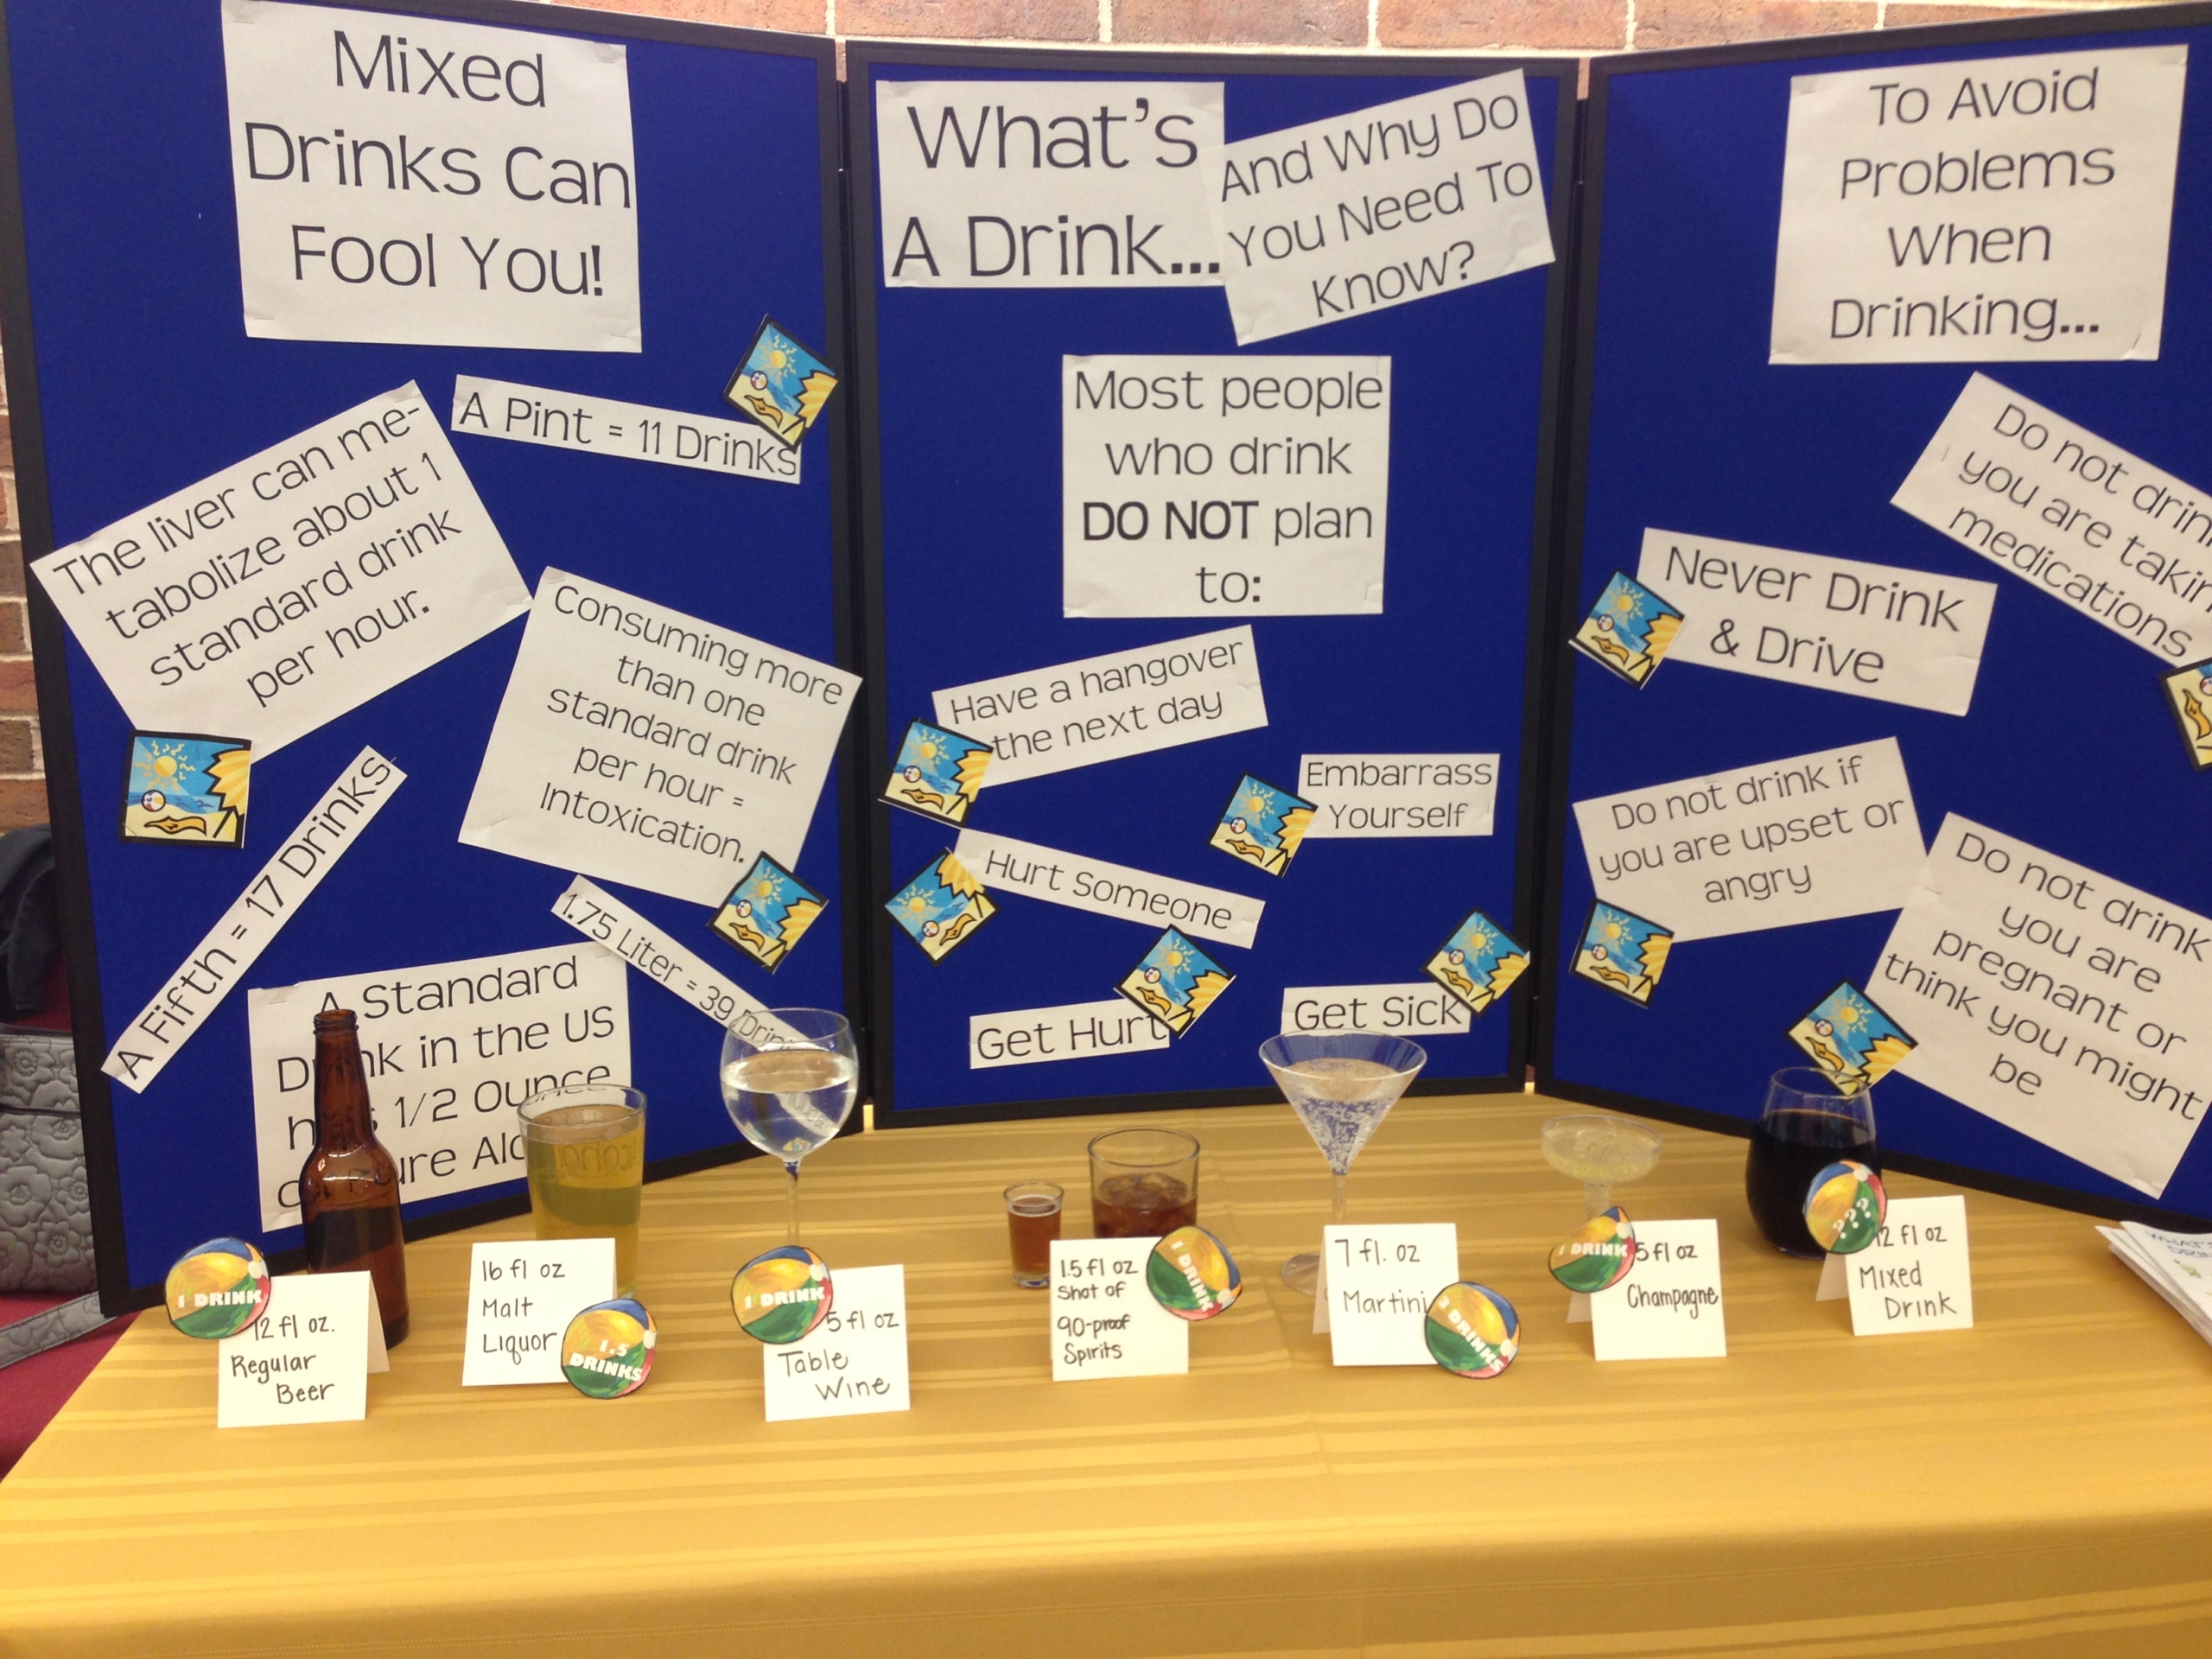 A display designed to educate students on what constitutes "1 standard drink" based on what type of alcoholic beverage is consumed.